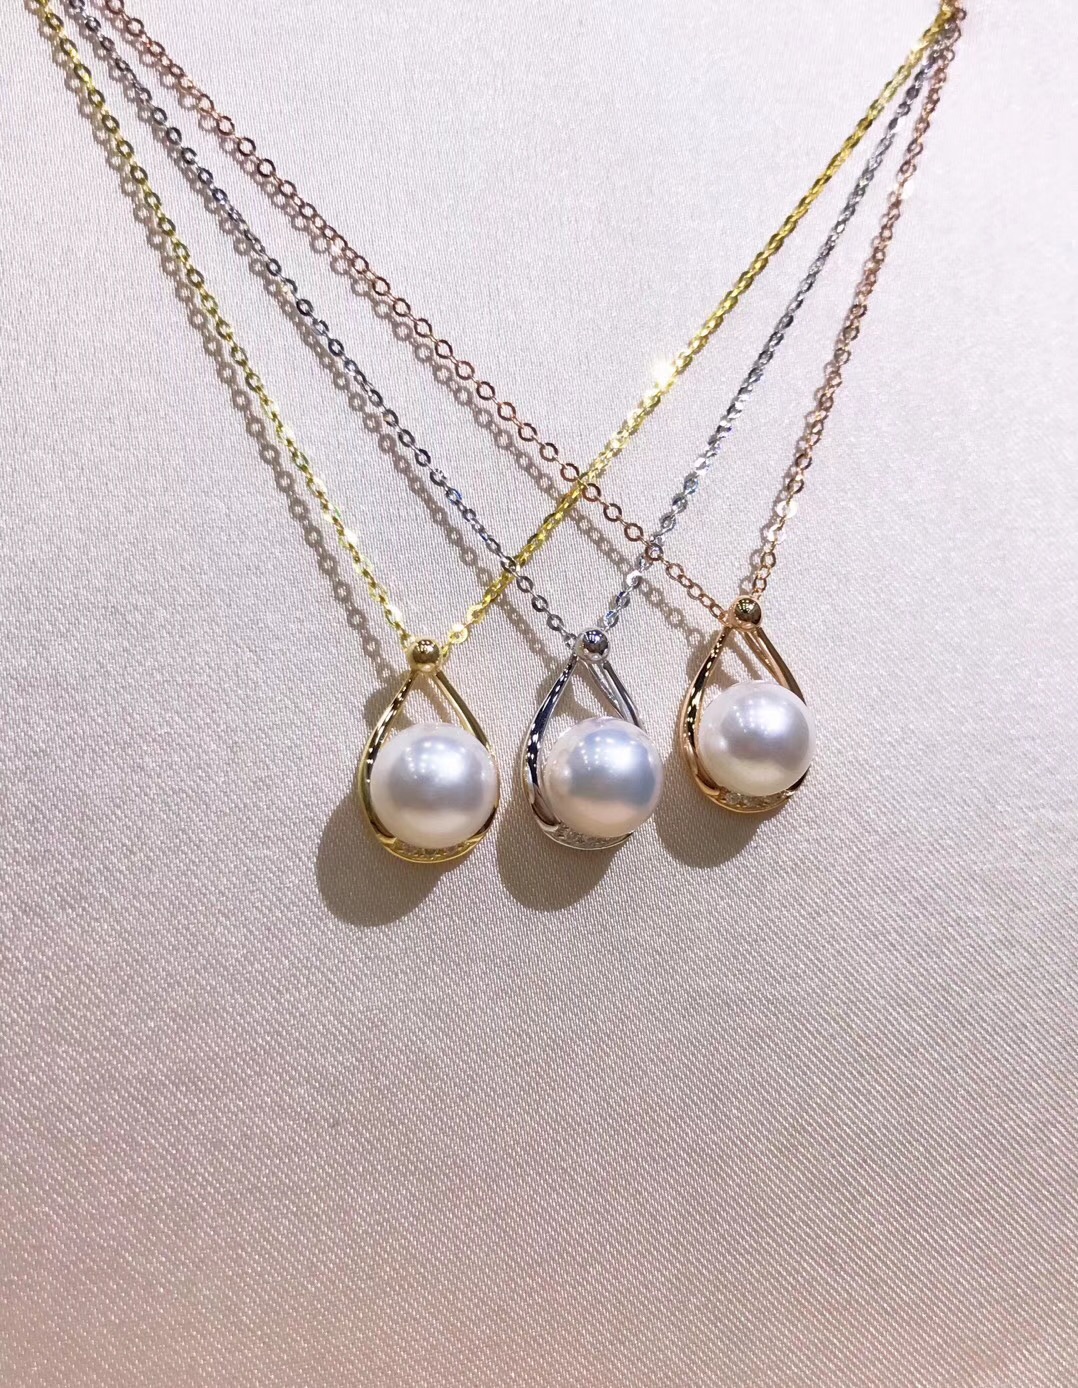 GYWP01174 Pearl Necklaces in 18k Gold